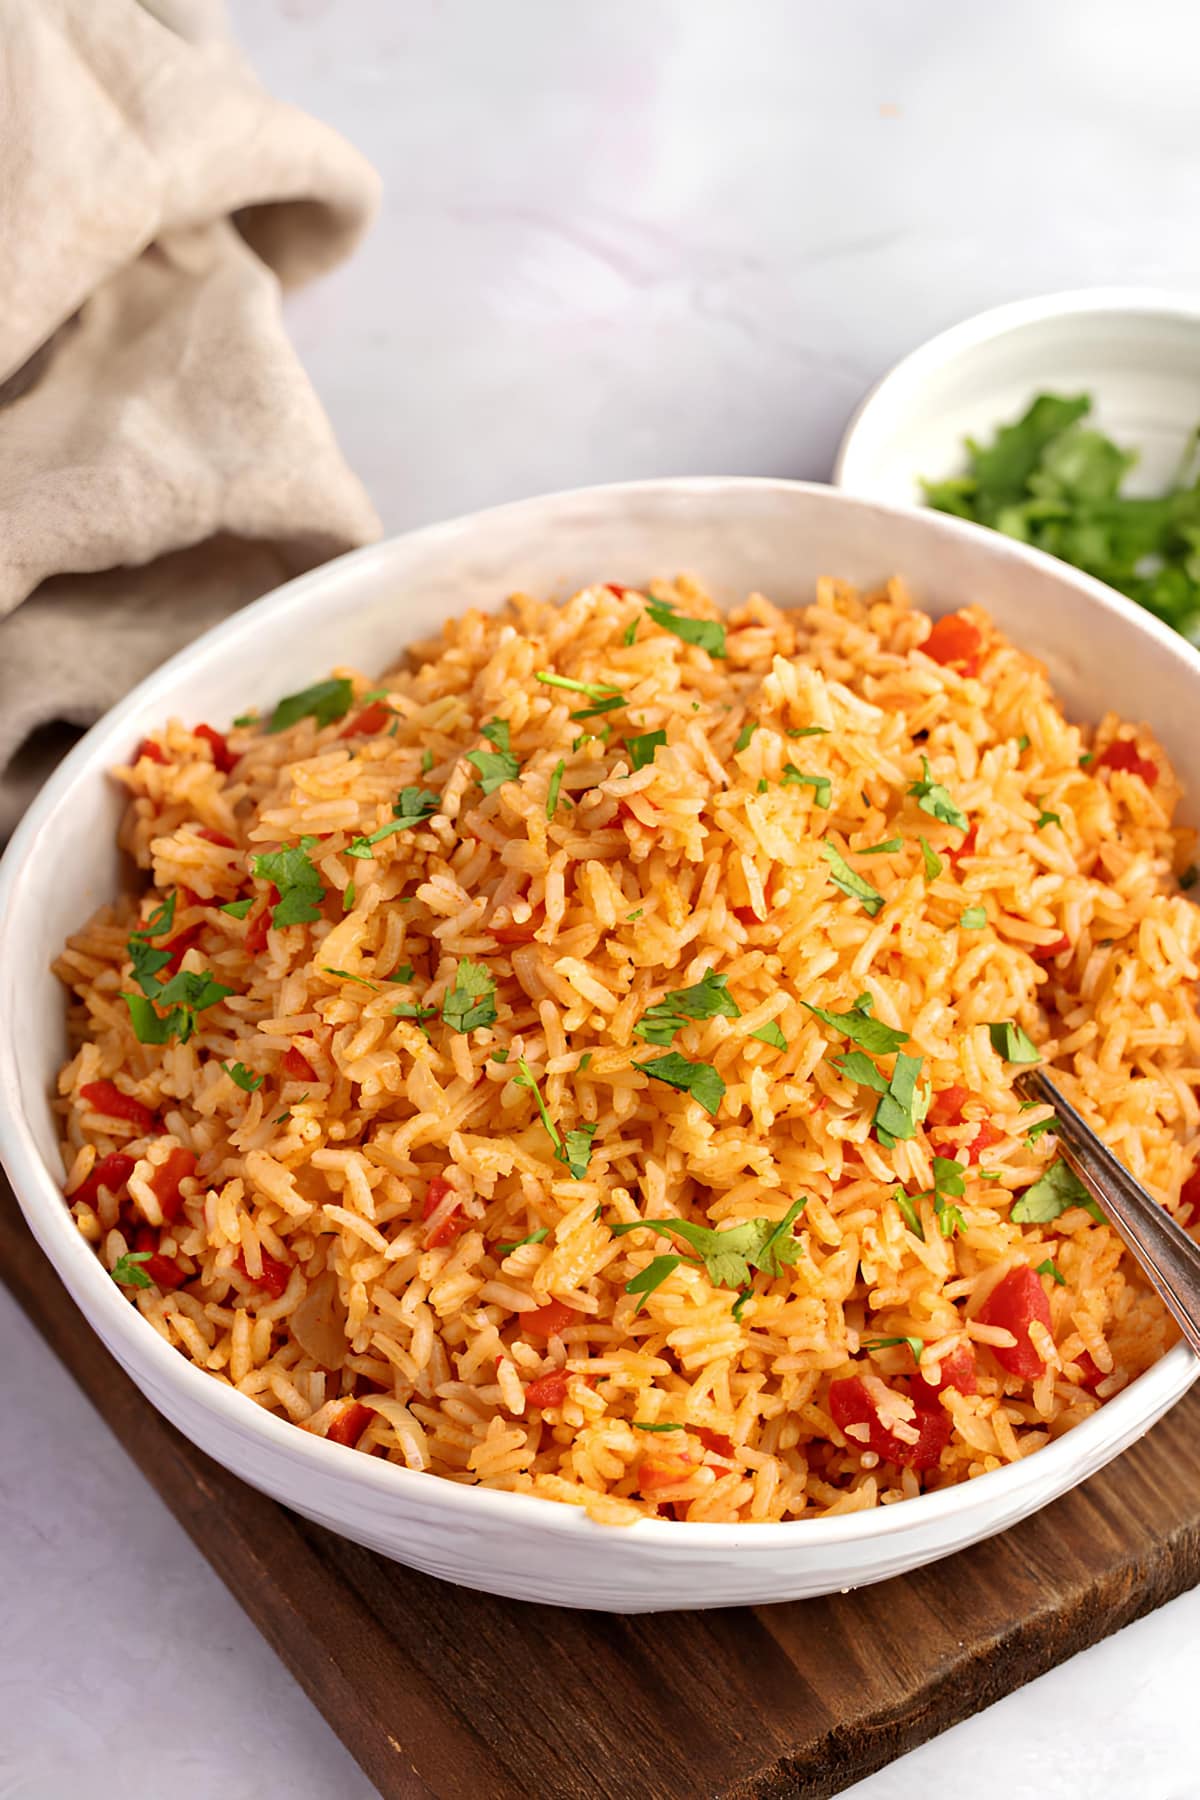 Spanish Rice: A delicious dish of fluffy rice cooked with savory spices and colorful vegetables, served in a traditional bowl